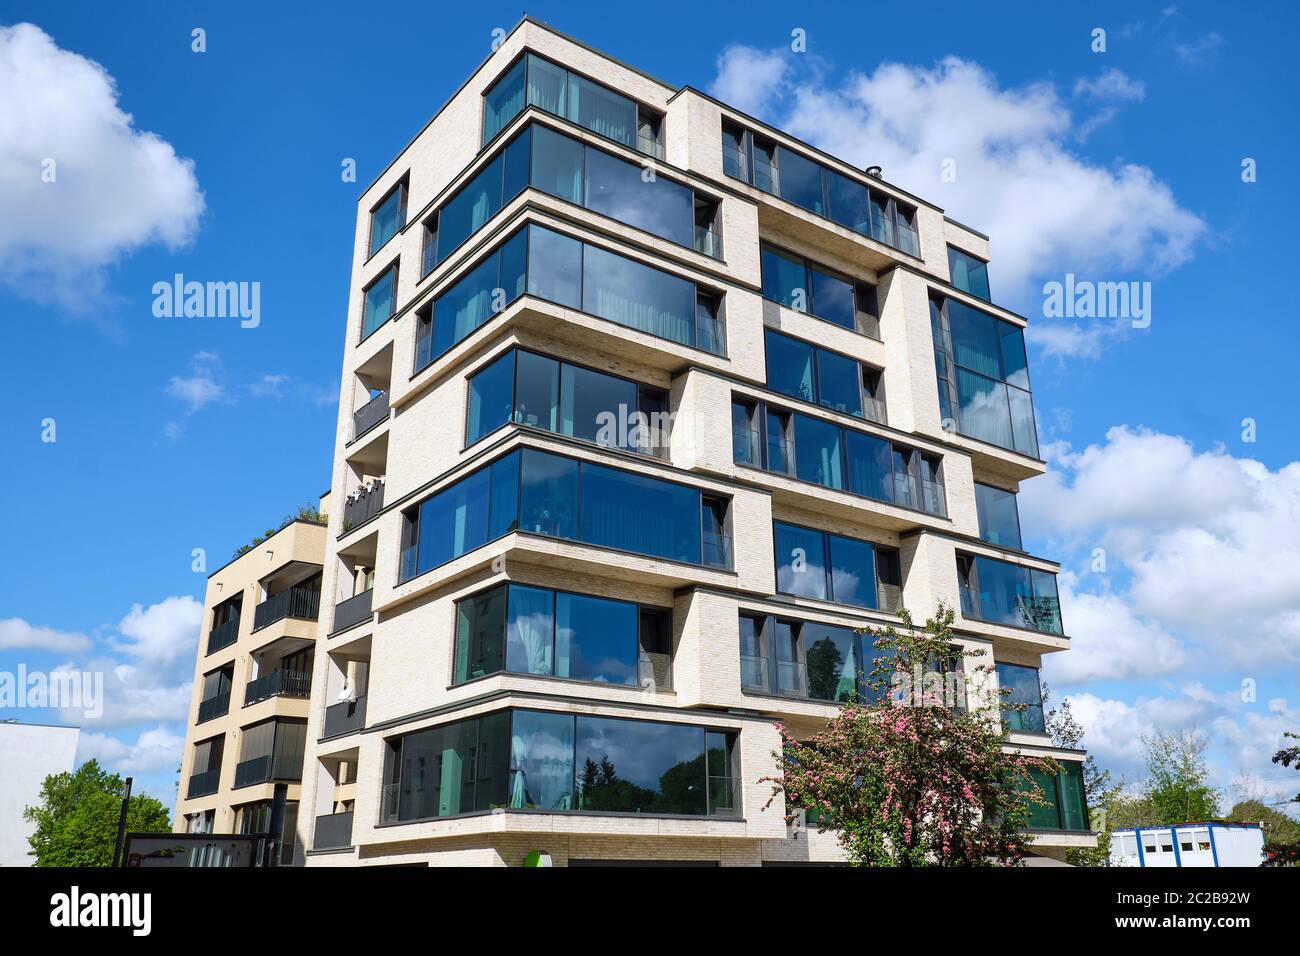 Modern multi-family house with a lof of glass seen in Berlin, Germany Stock Photo